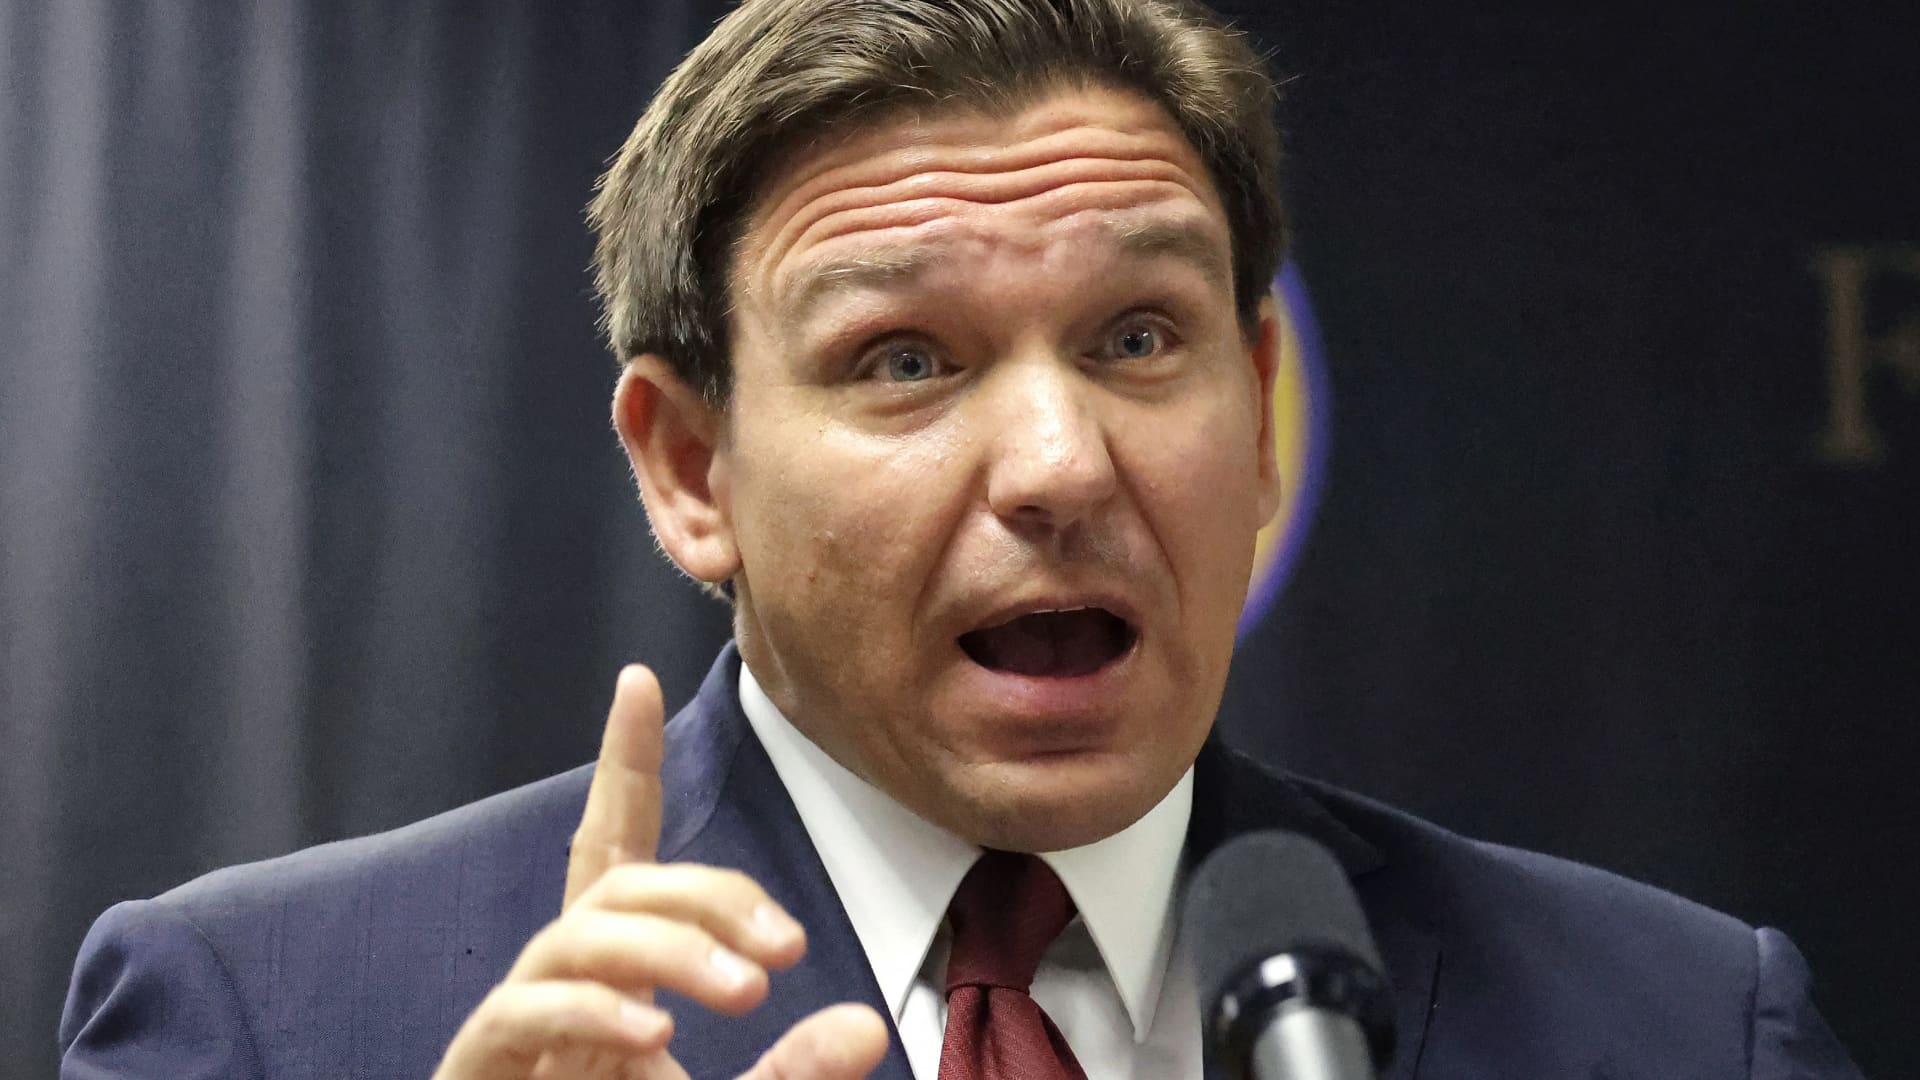 Florida Gov. Ron DeSantis, a critic of environmentally sensitive investing, didn't succeed in protecting his constituents from the ravages of Hurricane Ian, which may have been intensified by global warming.